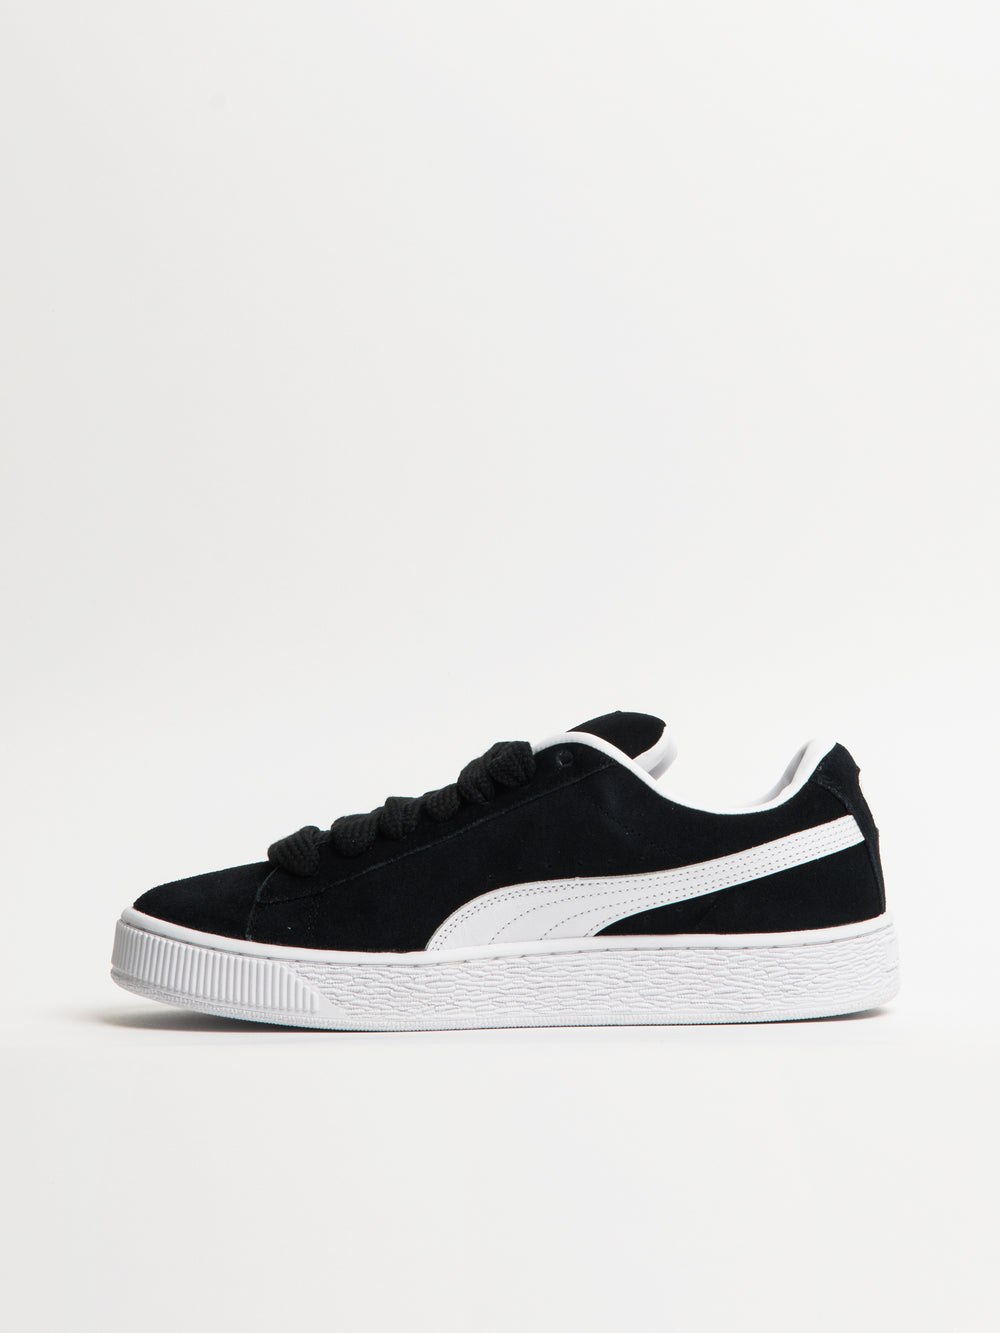 PUMA SUEDE CLASSIC MEN SHOES SIZE 11 NEW WITH BOX